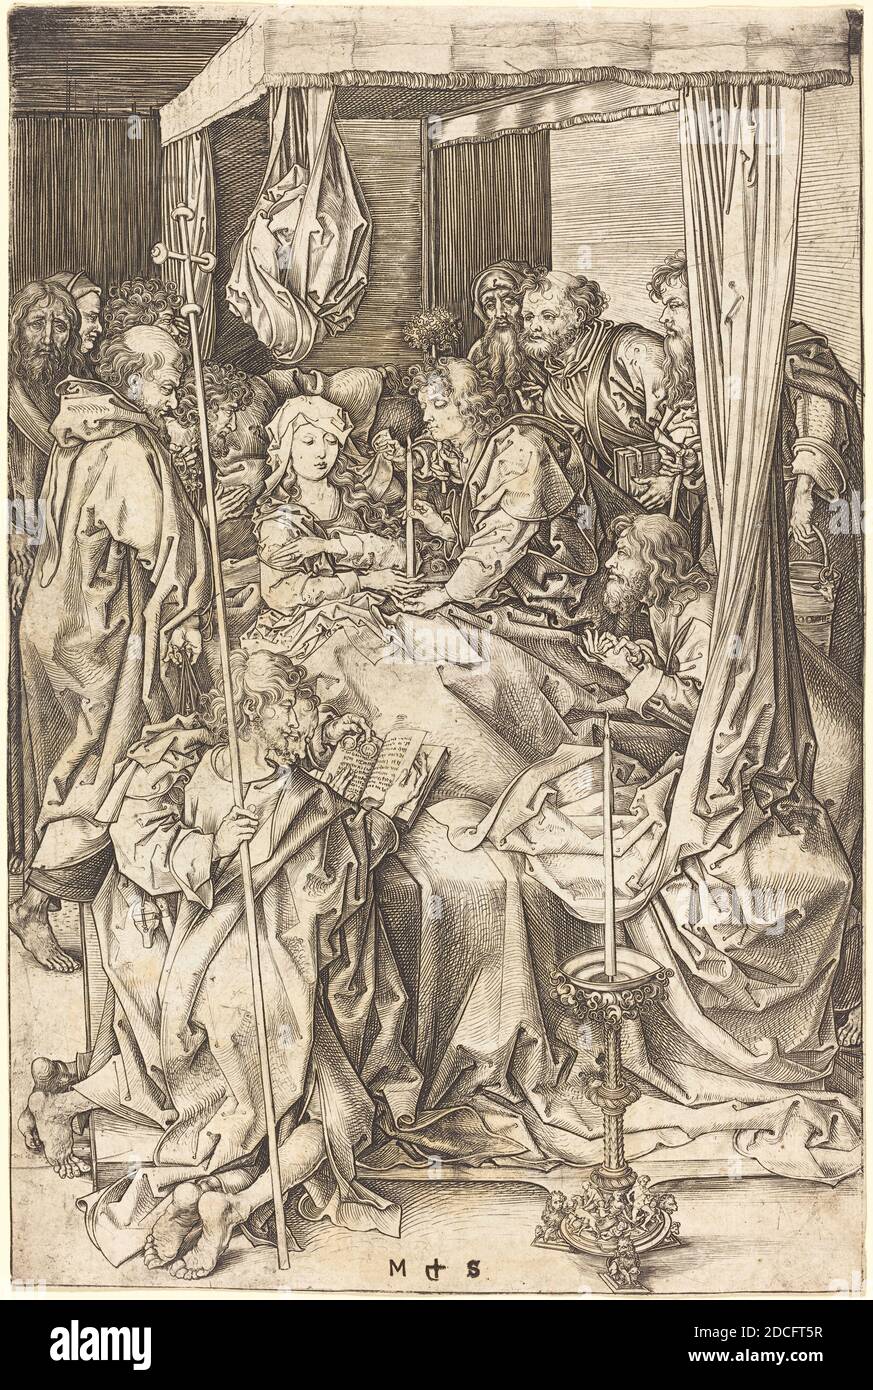 Martin Schongauer, (artist), German, c. 1450 - 1491, Death of the Virgin, Life of the Virgin, (series), c. 1470/1475, engraving on laid paper Stock Photo